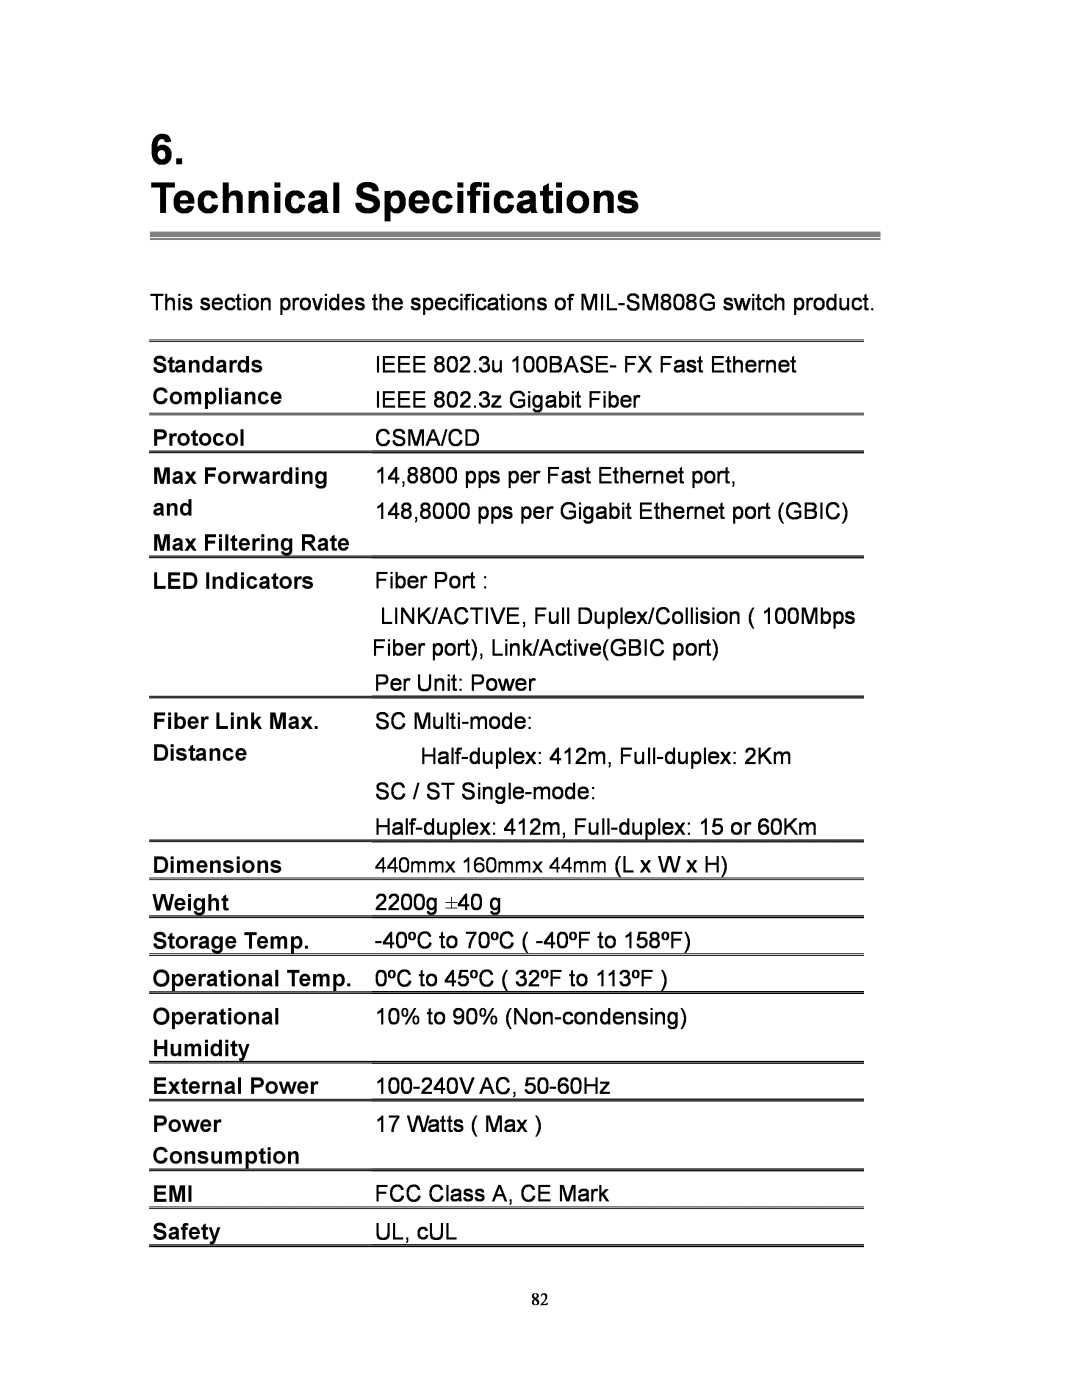 Milan Technology MIL-SM808G Technical Specifications, Standards, Compliance, Protocol, Max Forwarding, Max Filtering Rate 